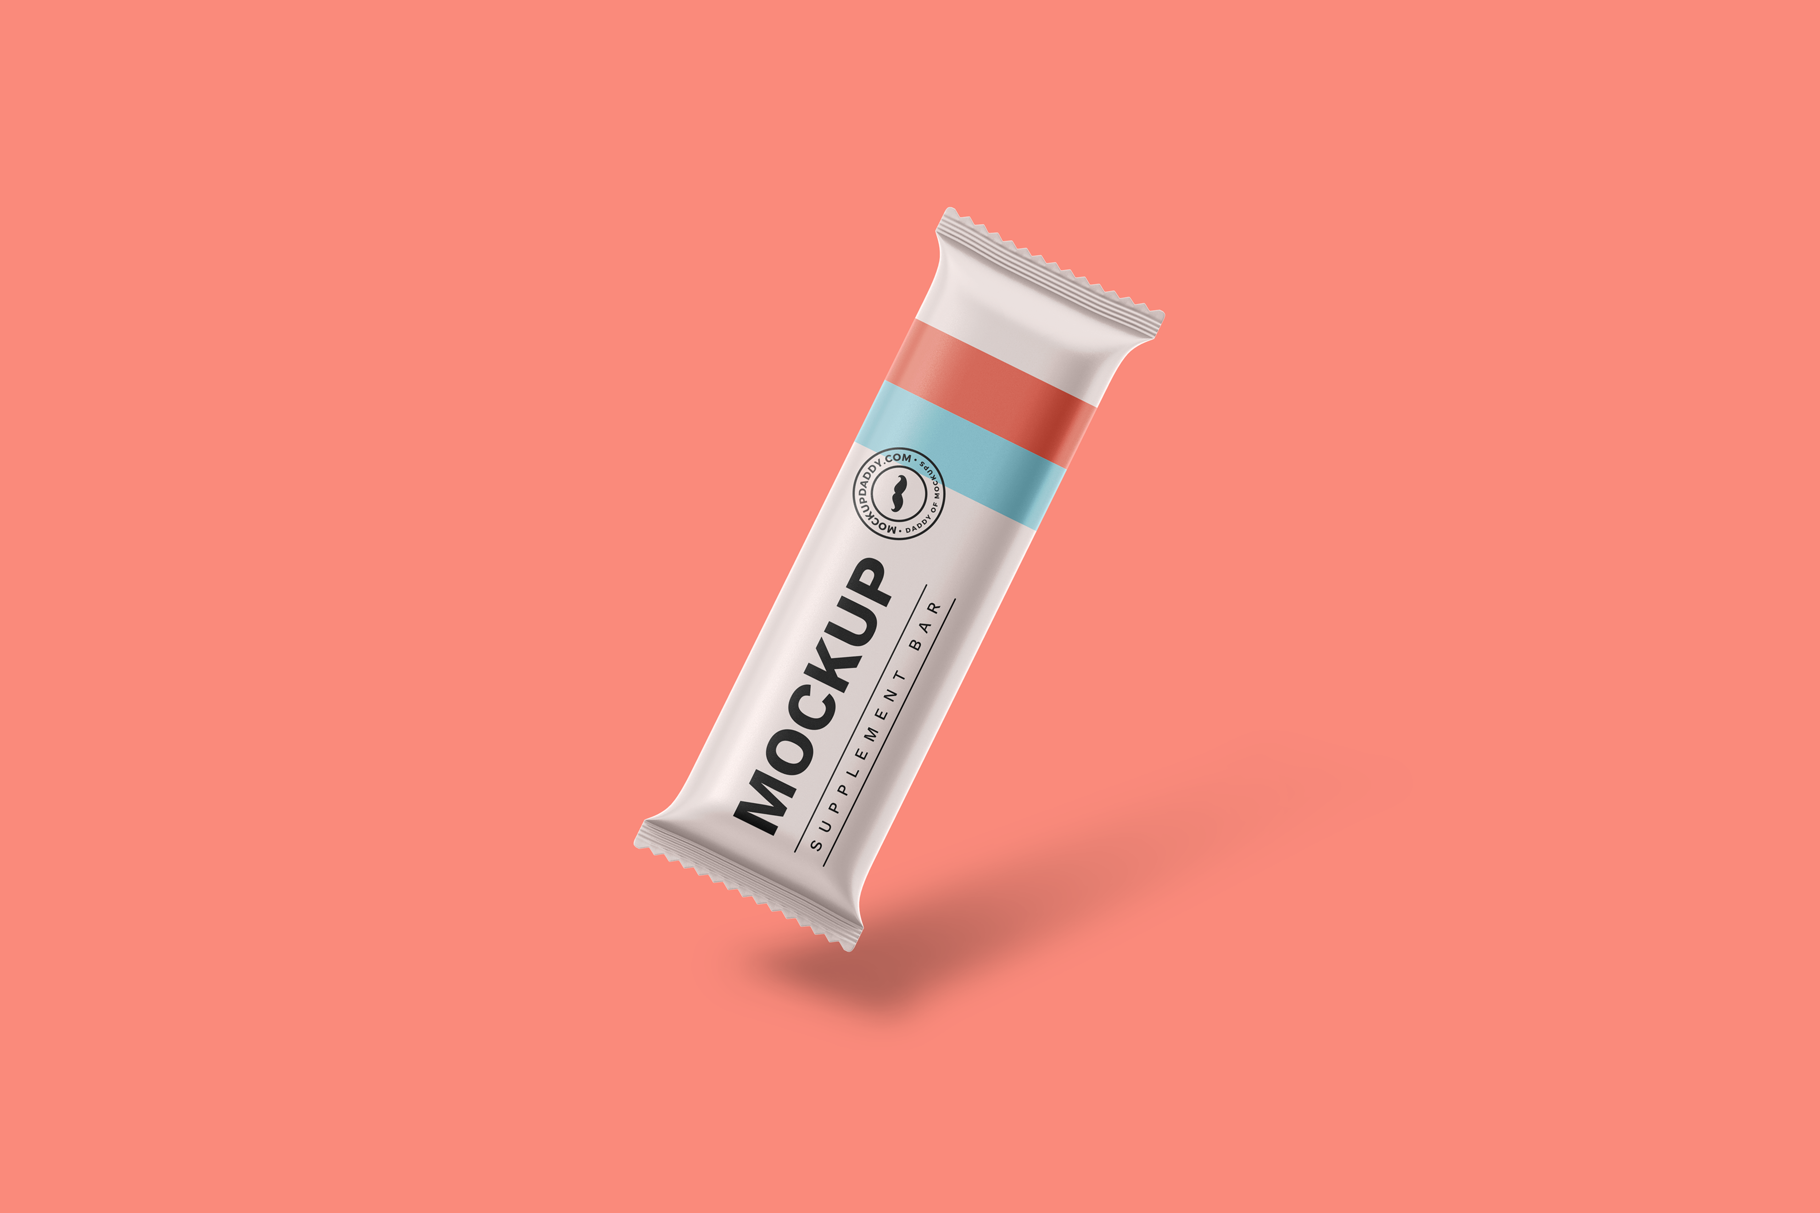 Protein Bar Free Psd Mockup in white color on red background.